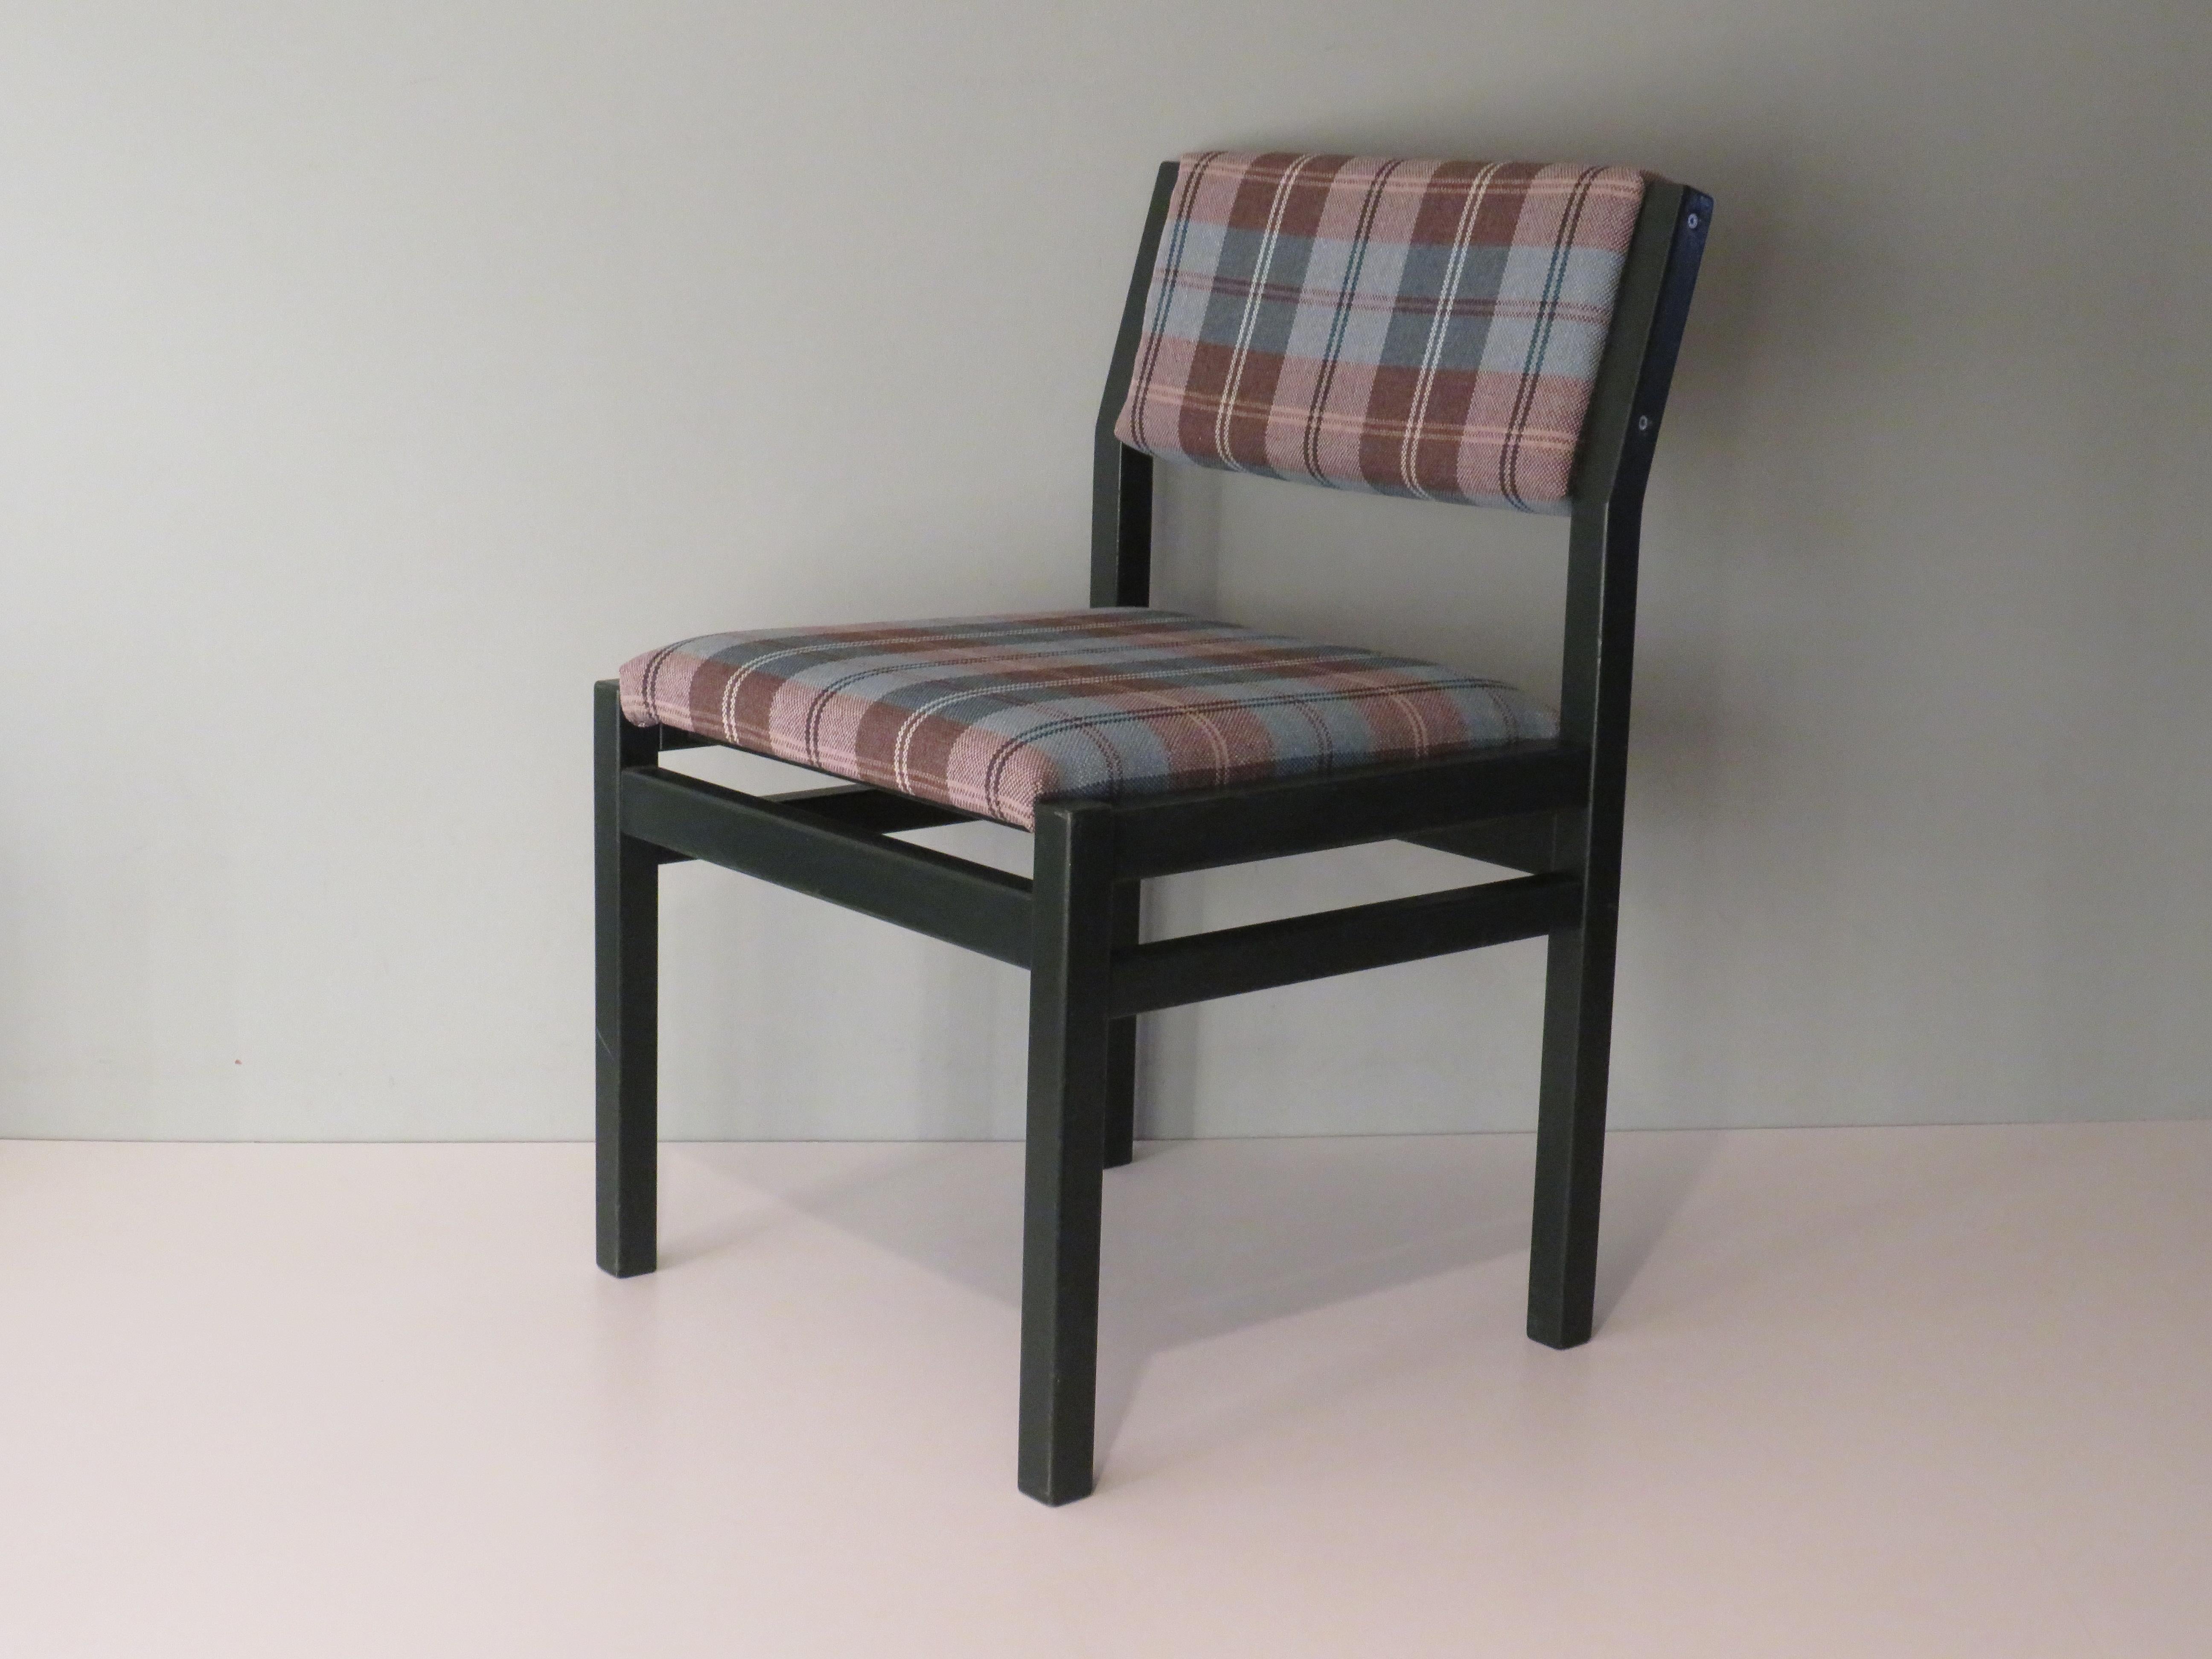 The minimalist chairs designed by Cees Braakman in 1960 belong to his Japanese Series.
They are made of very dark green lacquered afro-teak and over time they have been fitted with a new foam and blue-brown checkered fabric, which are still in very